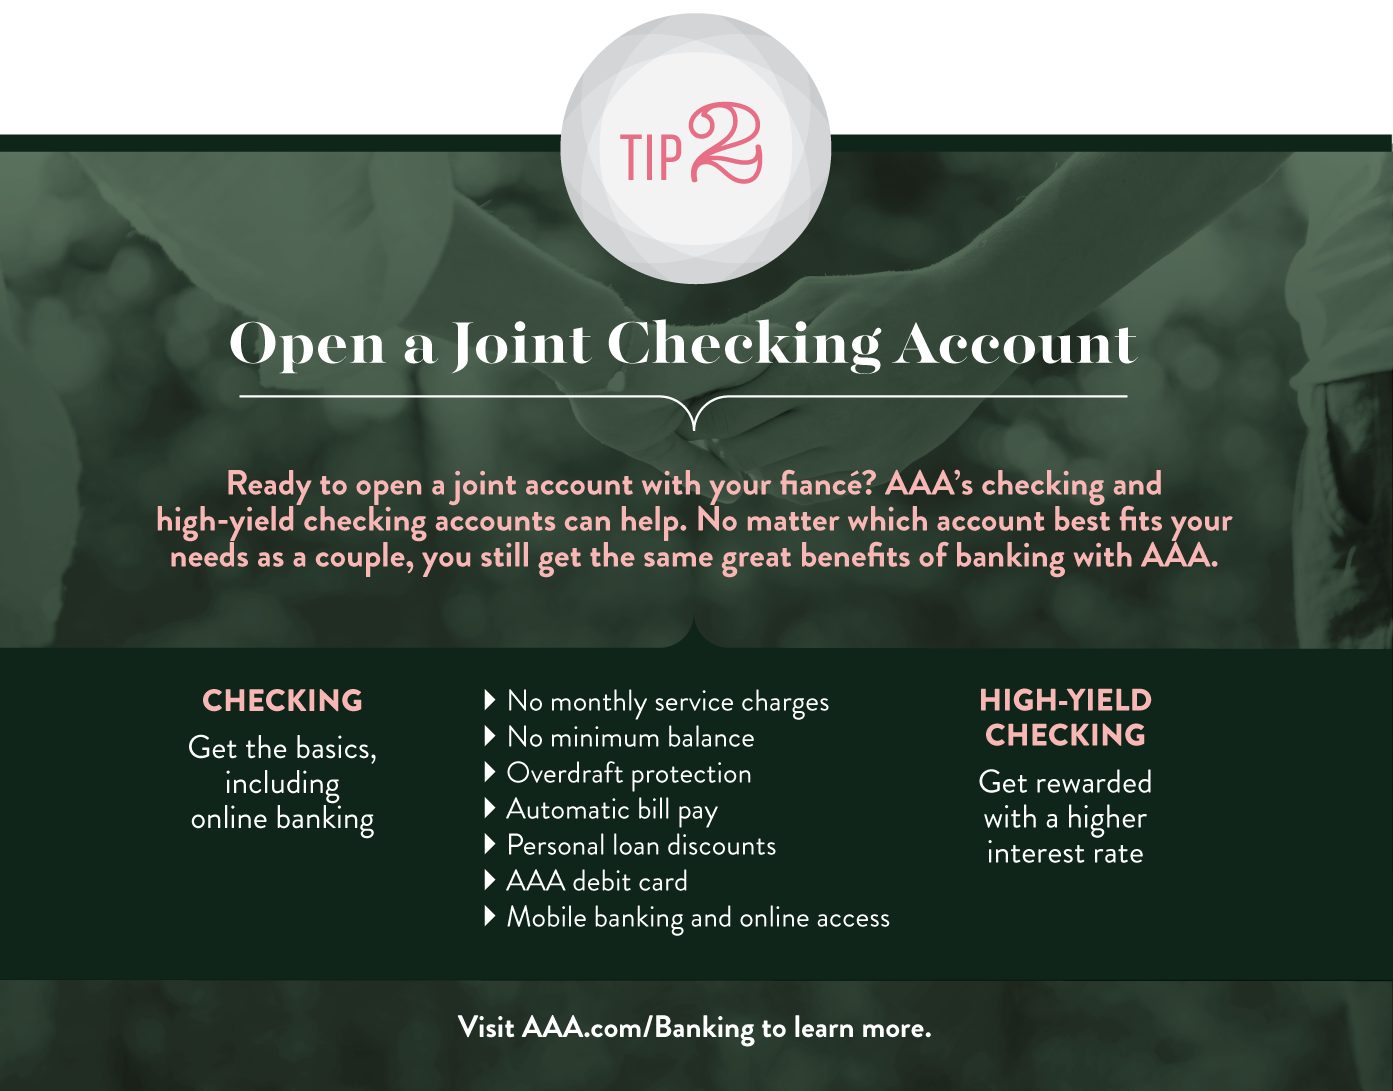 How to open a joint checking account for newly married couples